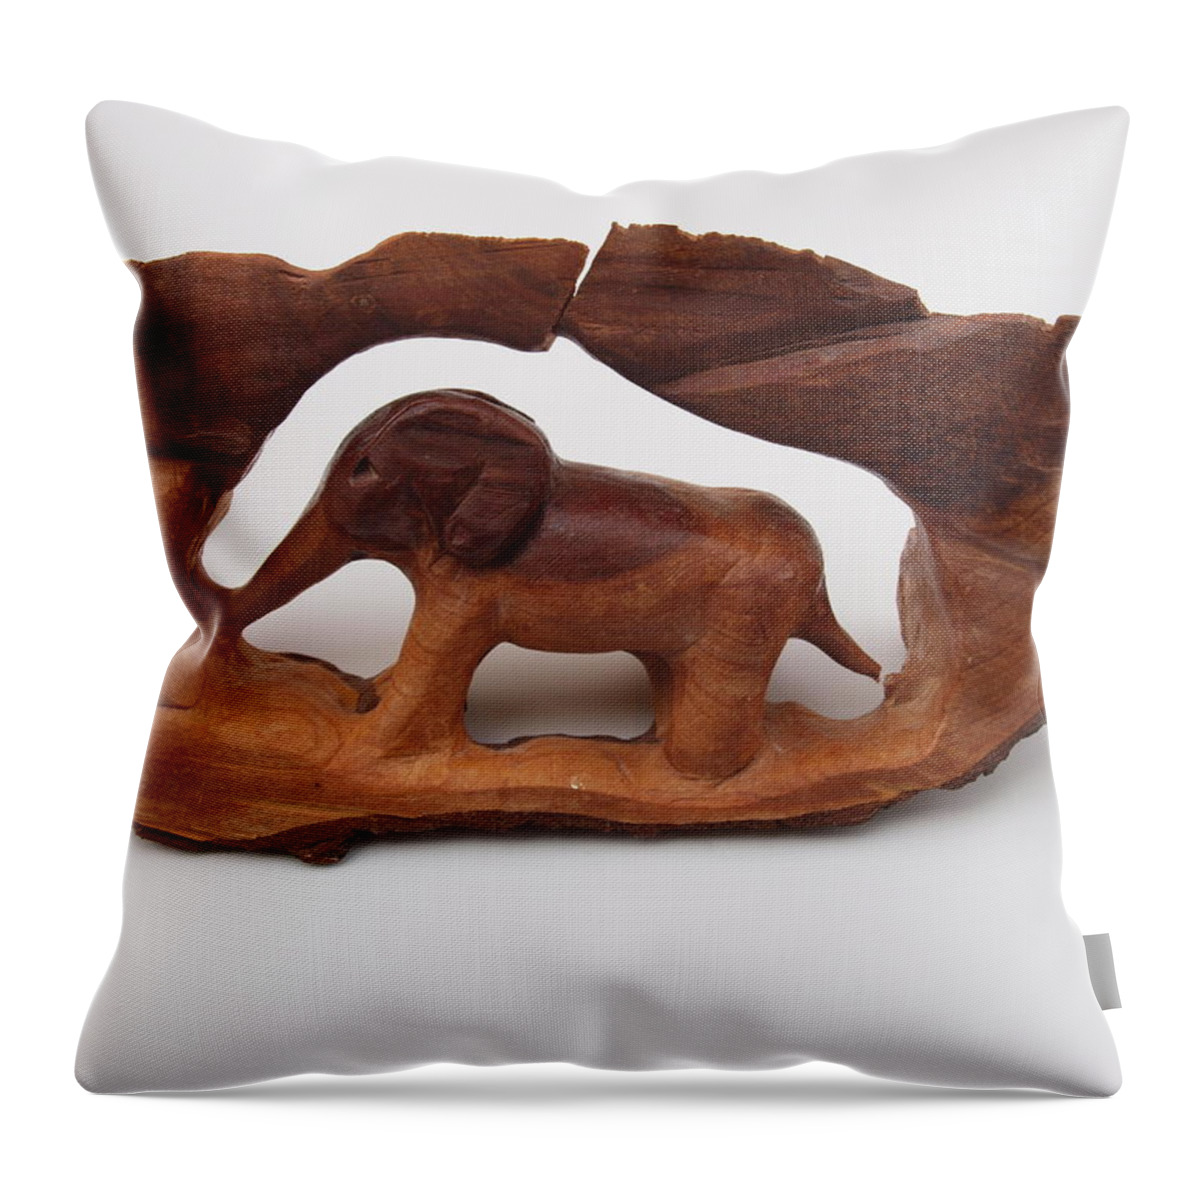 Elephants Throw Pillow featuring the sculpture Baby elephant stuck in a tree by Robert Margetts